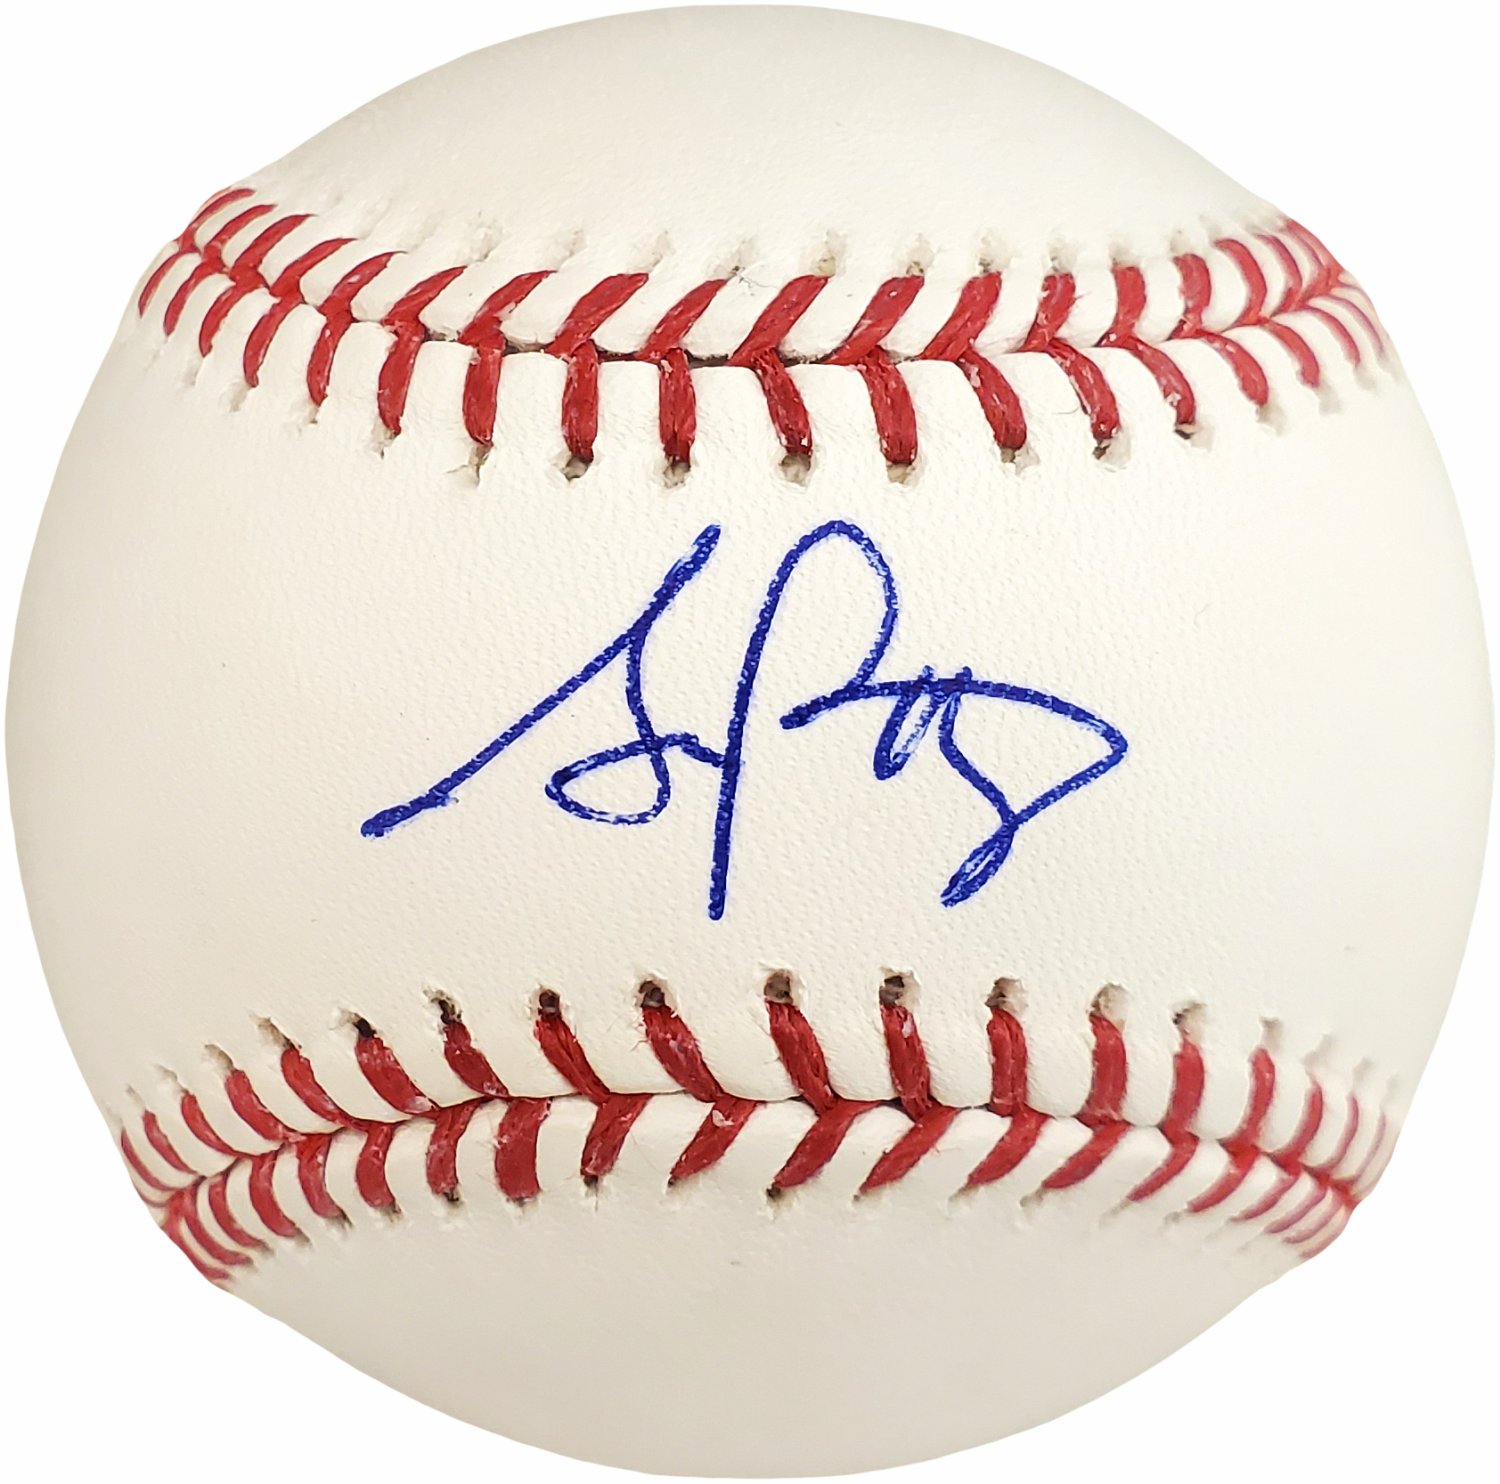 Signed Stephen Piscotty Autographed Official MLB Baseball St. Louis Cardinals MLB Holo Stock #102685